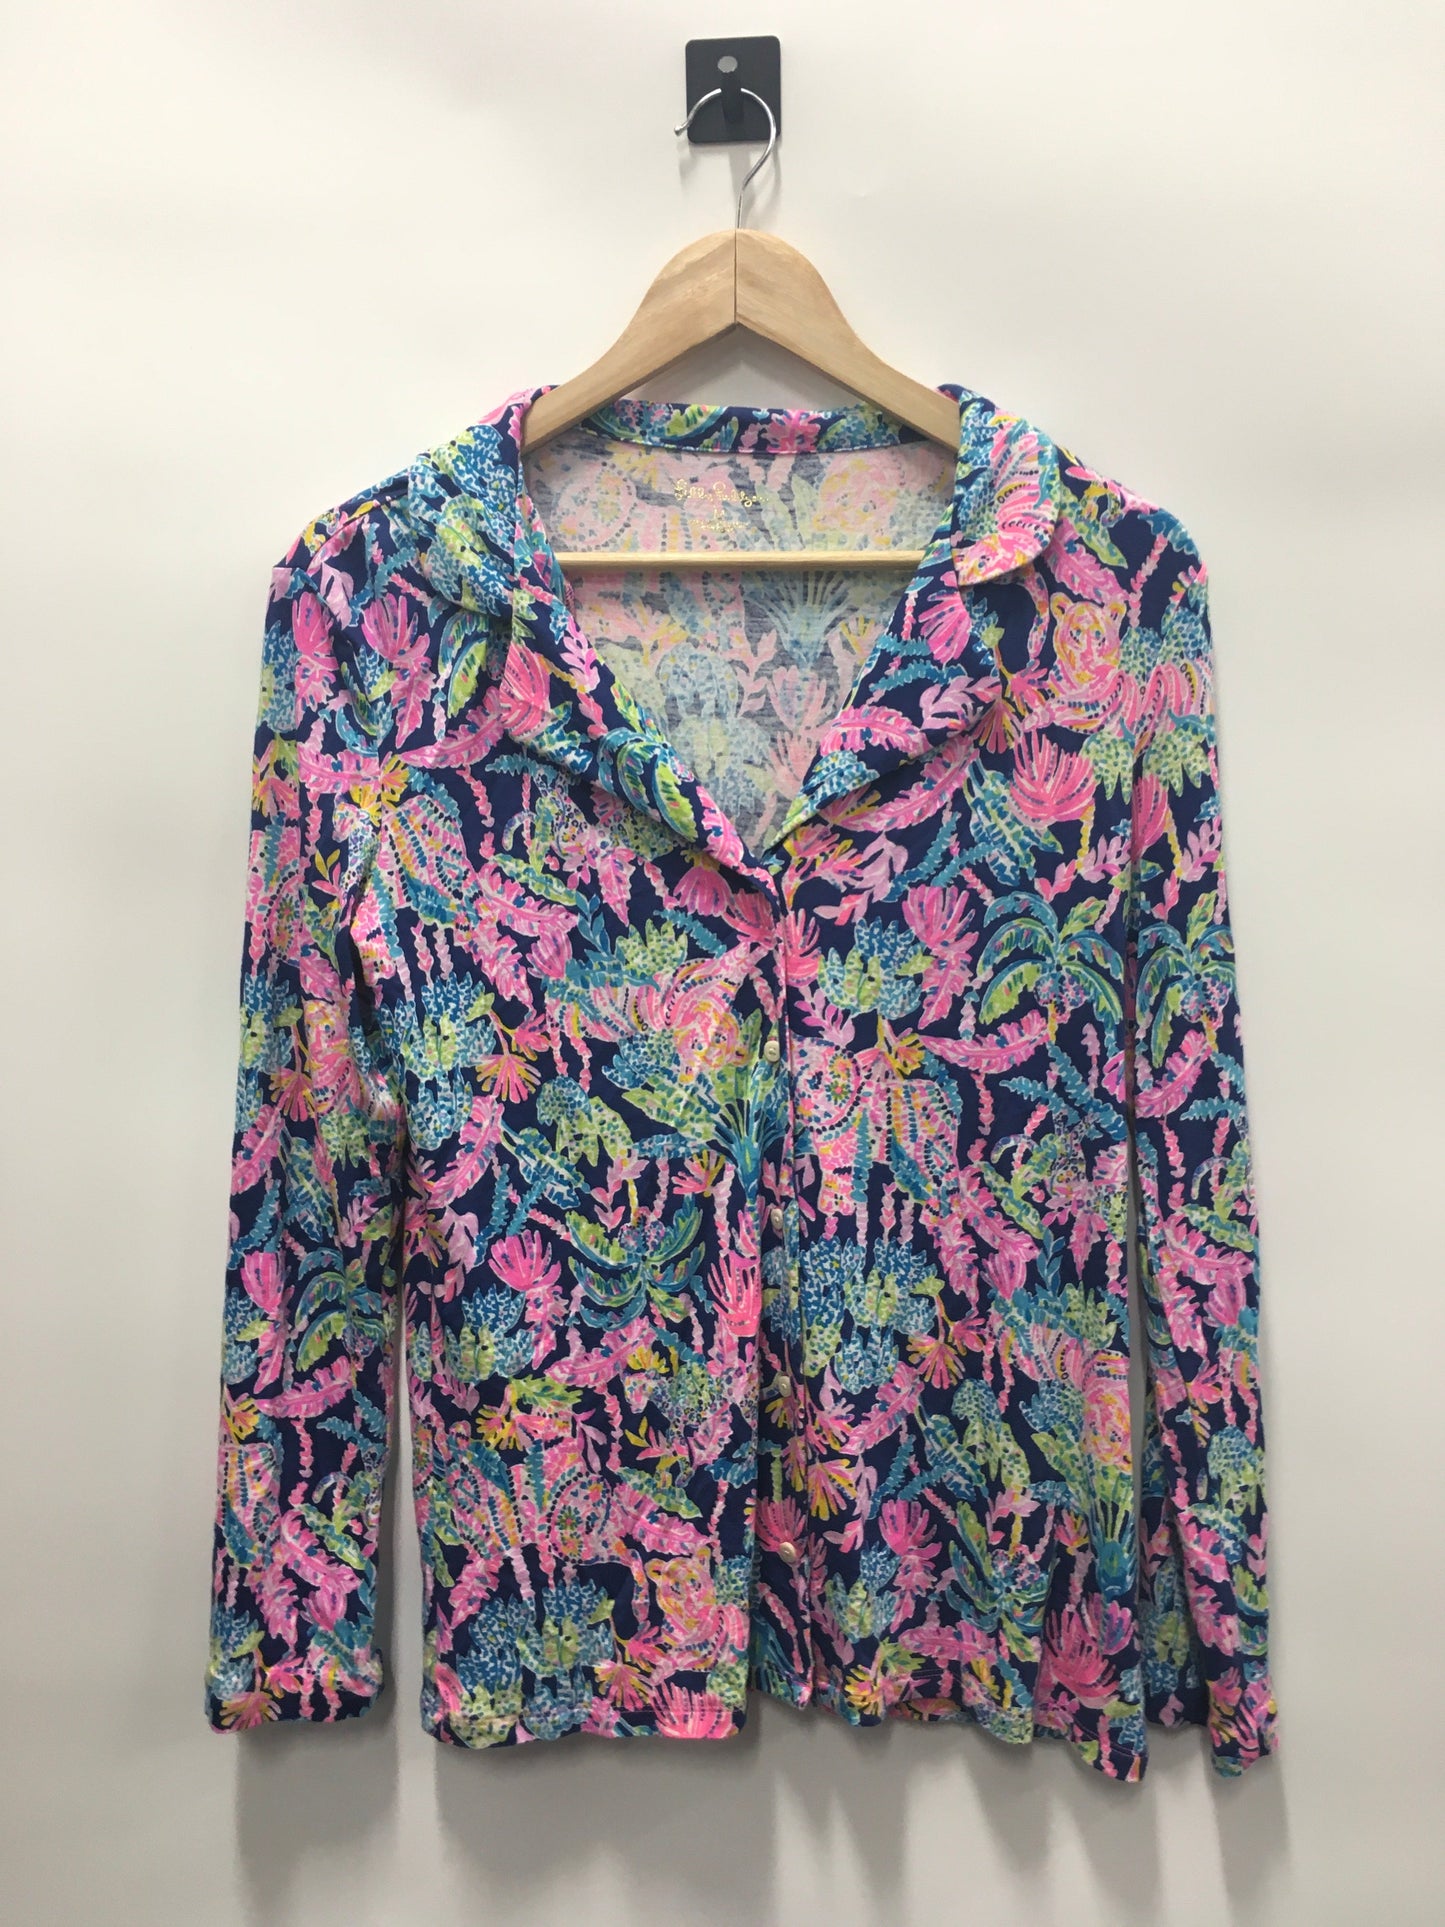 Multi-colored Top Long Sleeve Lilly Pulitzer, Size M